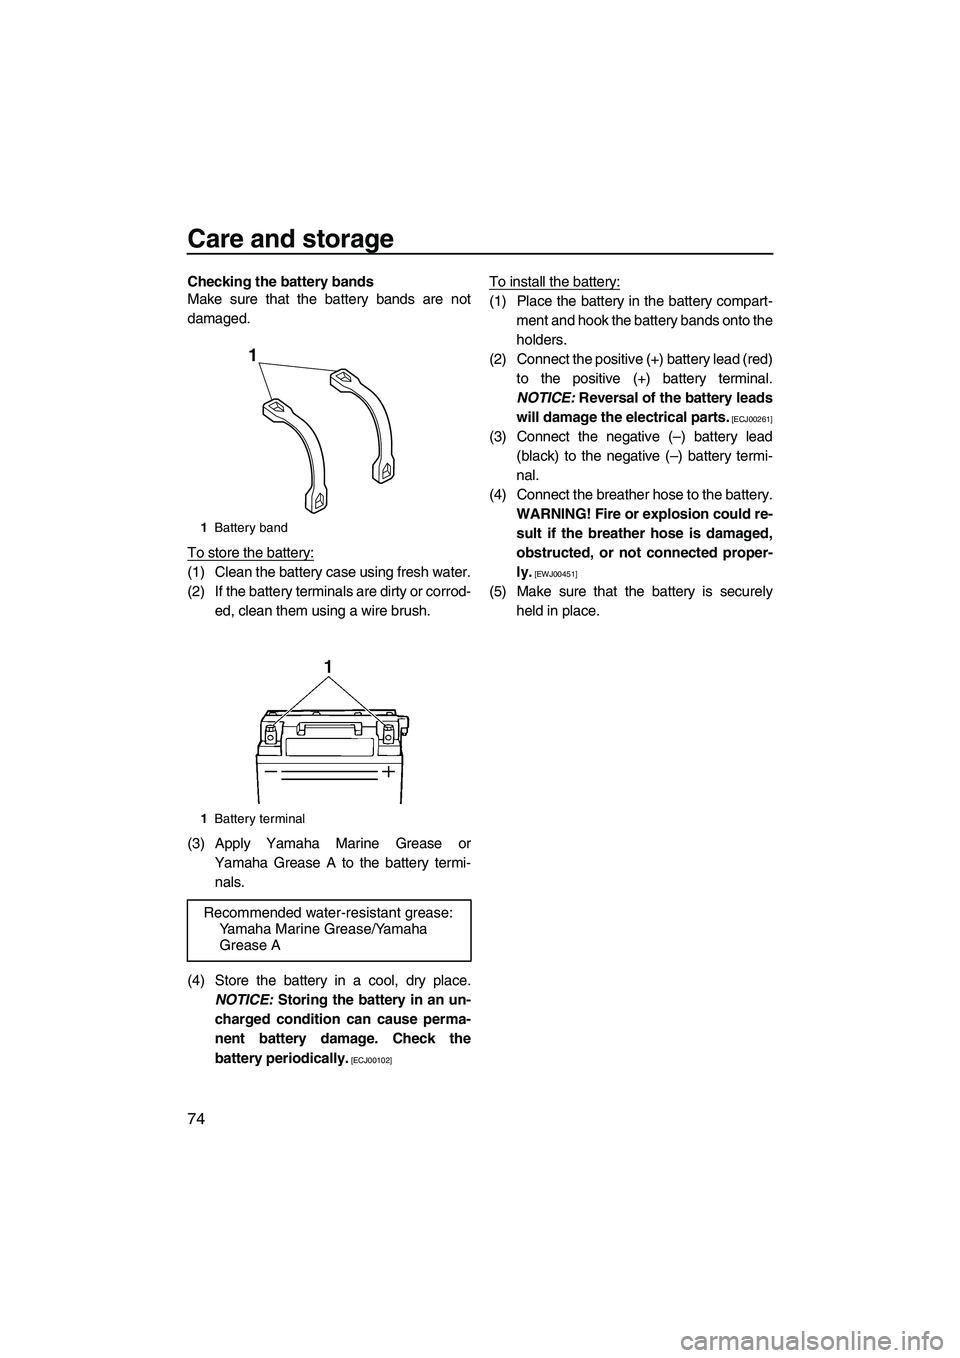 YAMAHA VX SPORT 2013  Owners Manual Care and storage
74
Checking the battery bands
Make sure that the battery bands are not
damaged.
To store the battery:
(1) Clean the battery case using fresh water.
(2) If the battery terminals are di